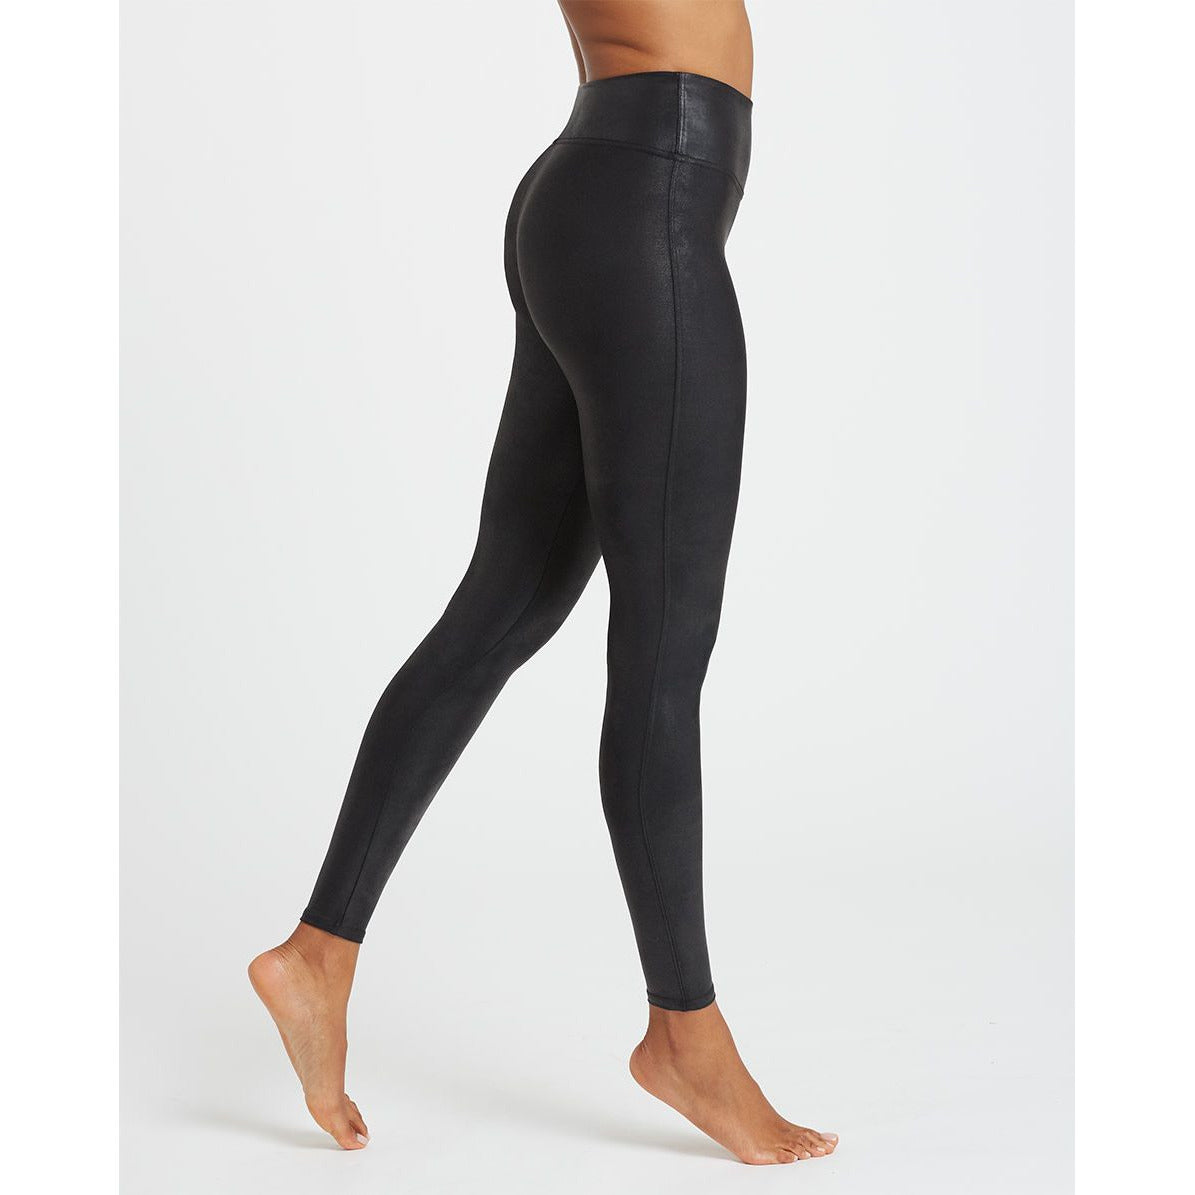 SPANX Assets Women's Seamless Leggings - (Small, Very Black) at   Women's Clothing store